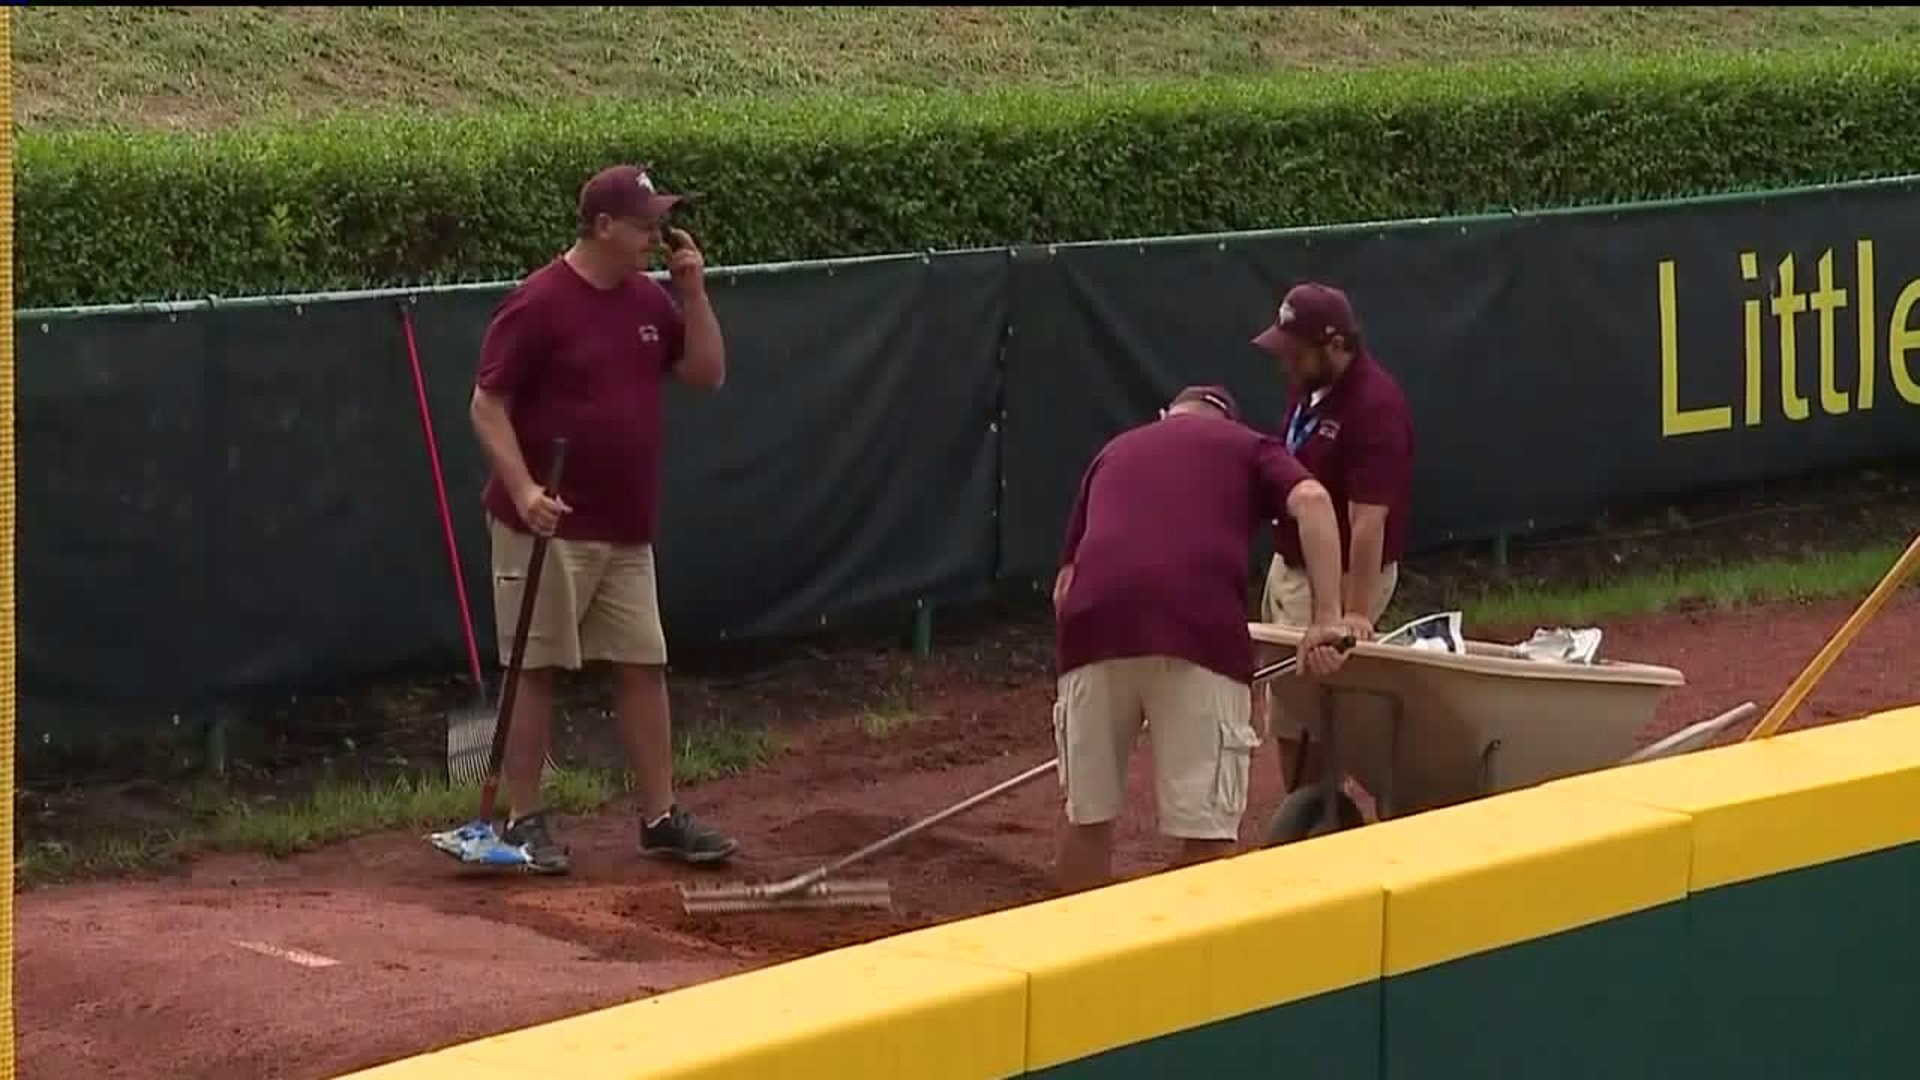 Grounds Crew Keeping Little League Fields Ready to Play